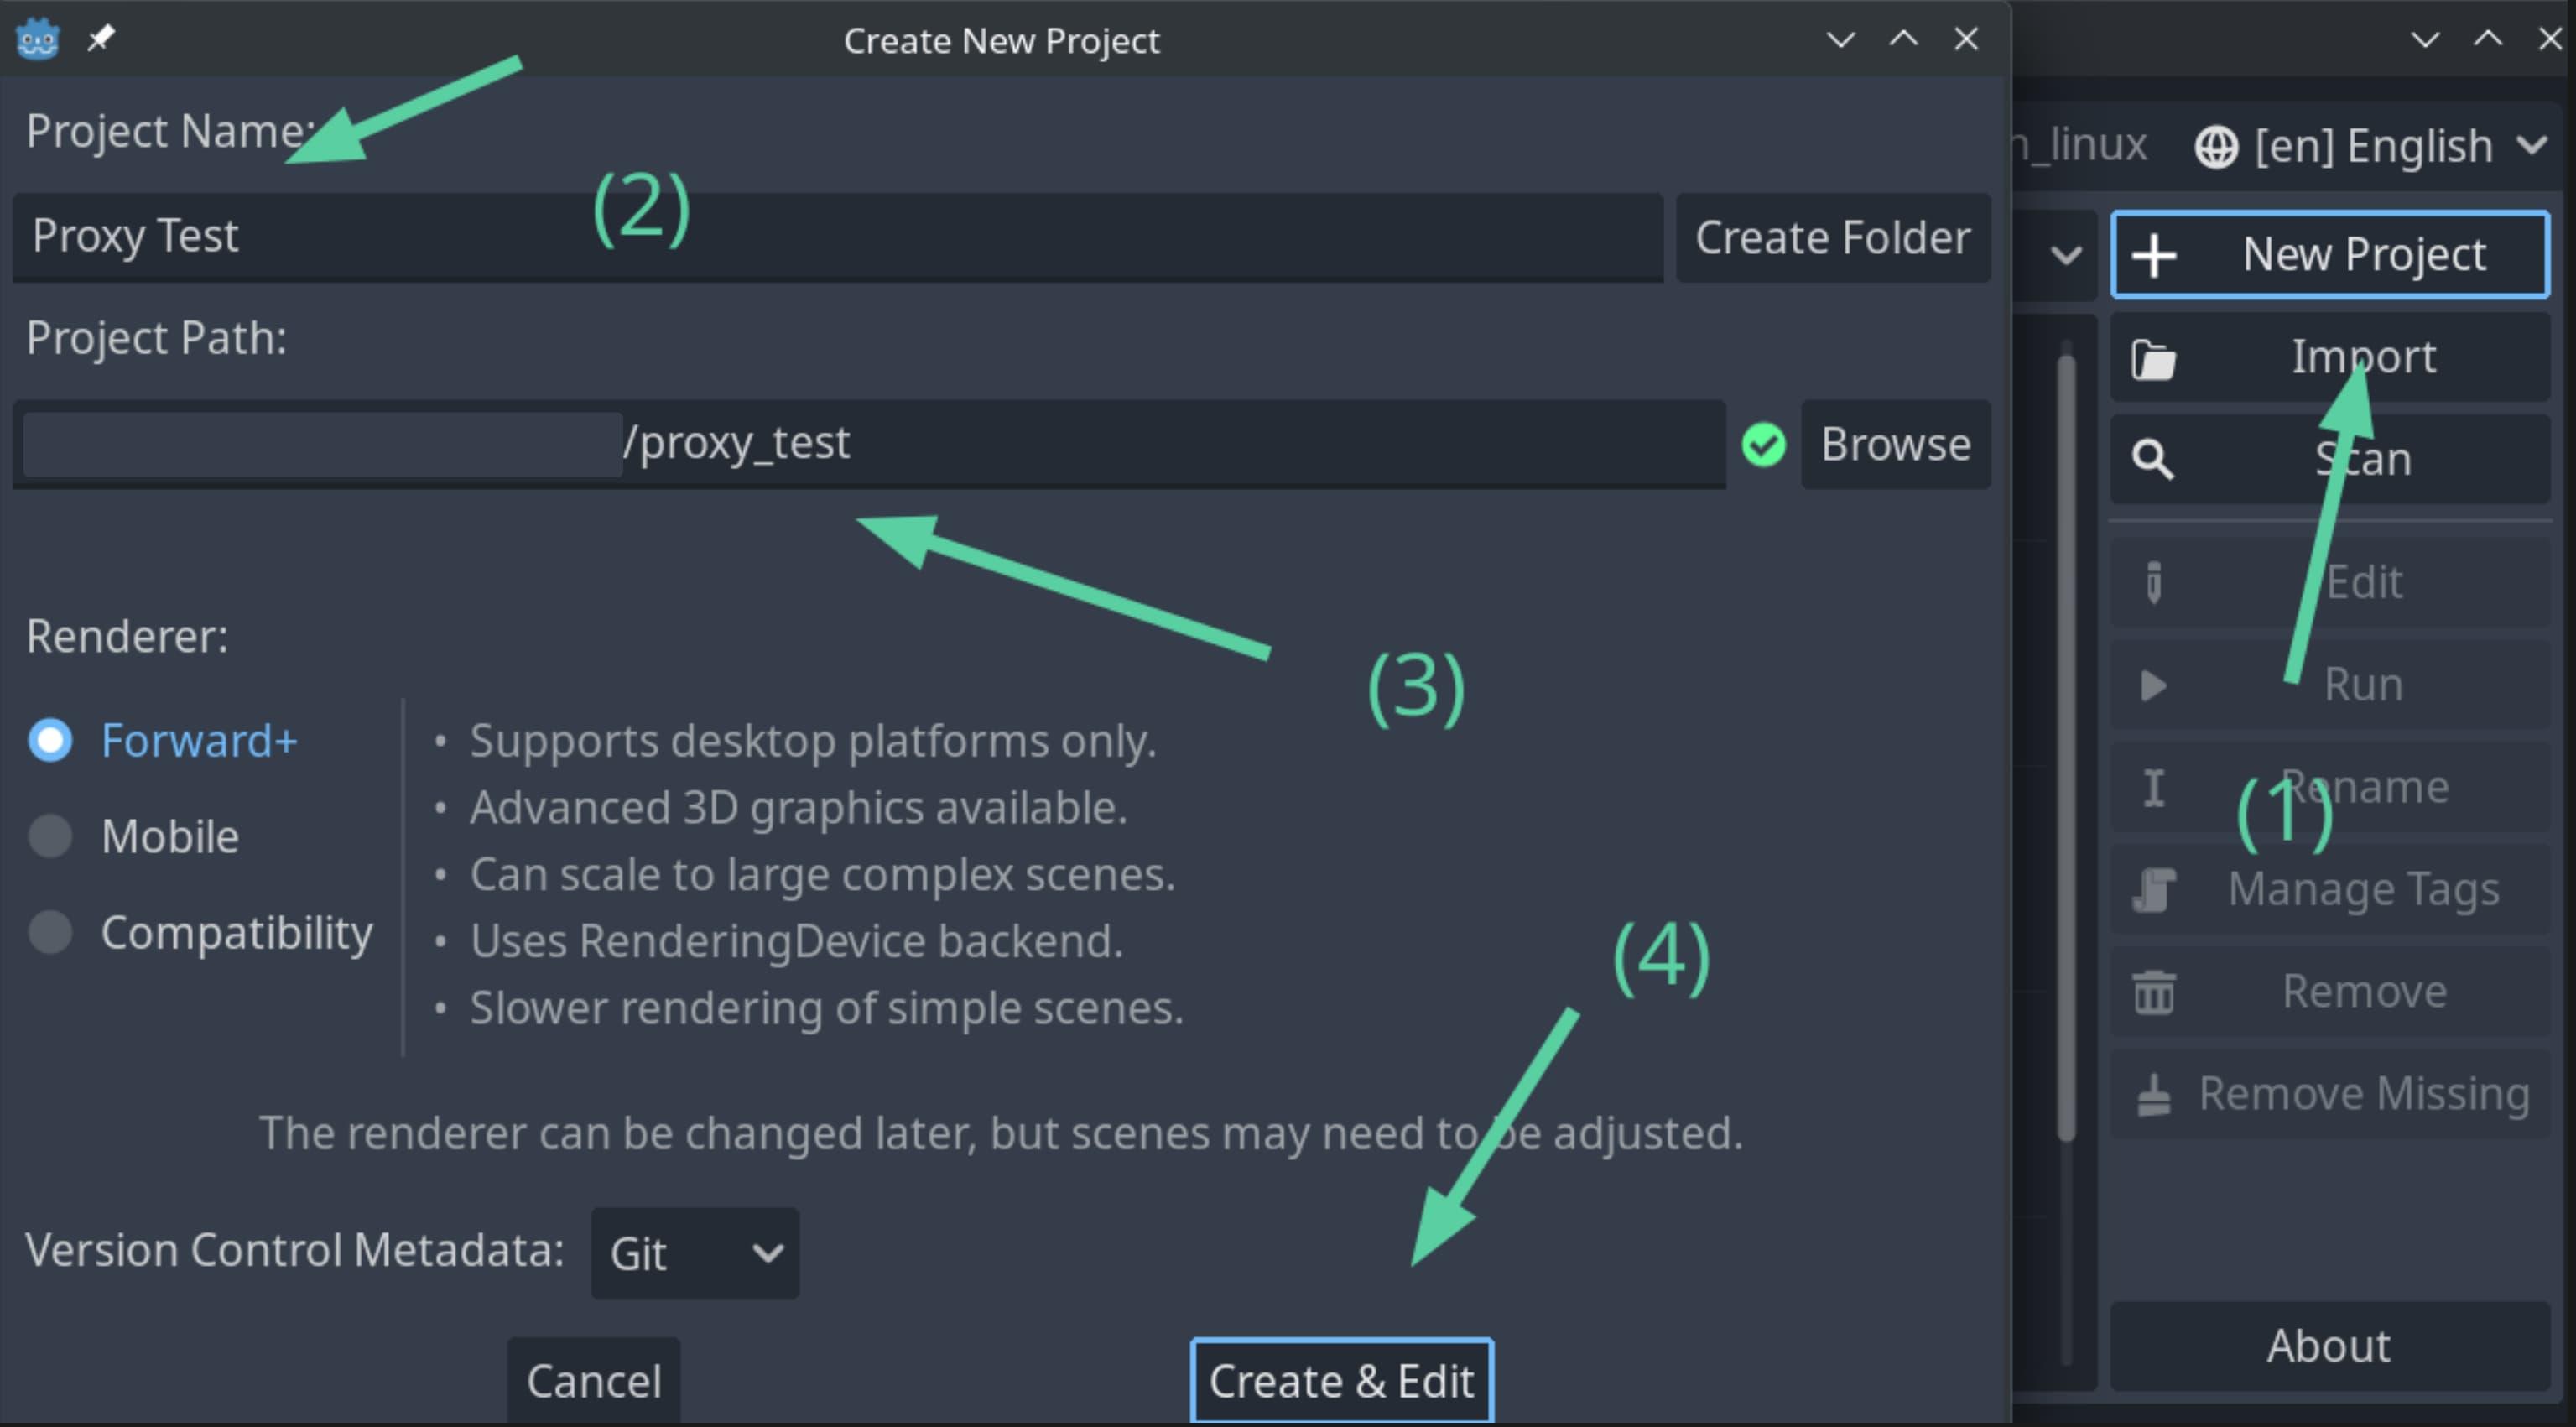 Click New Project, then give it a name and folder path, then click "Create And Edit"